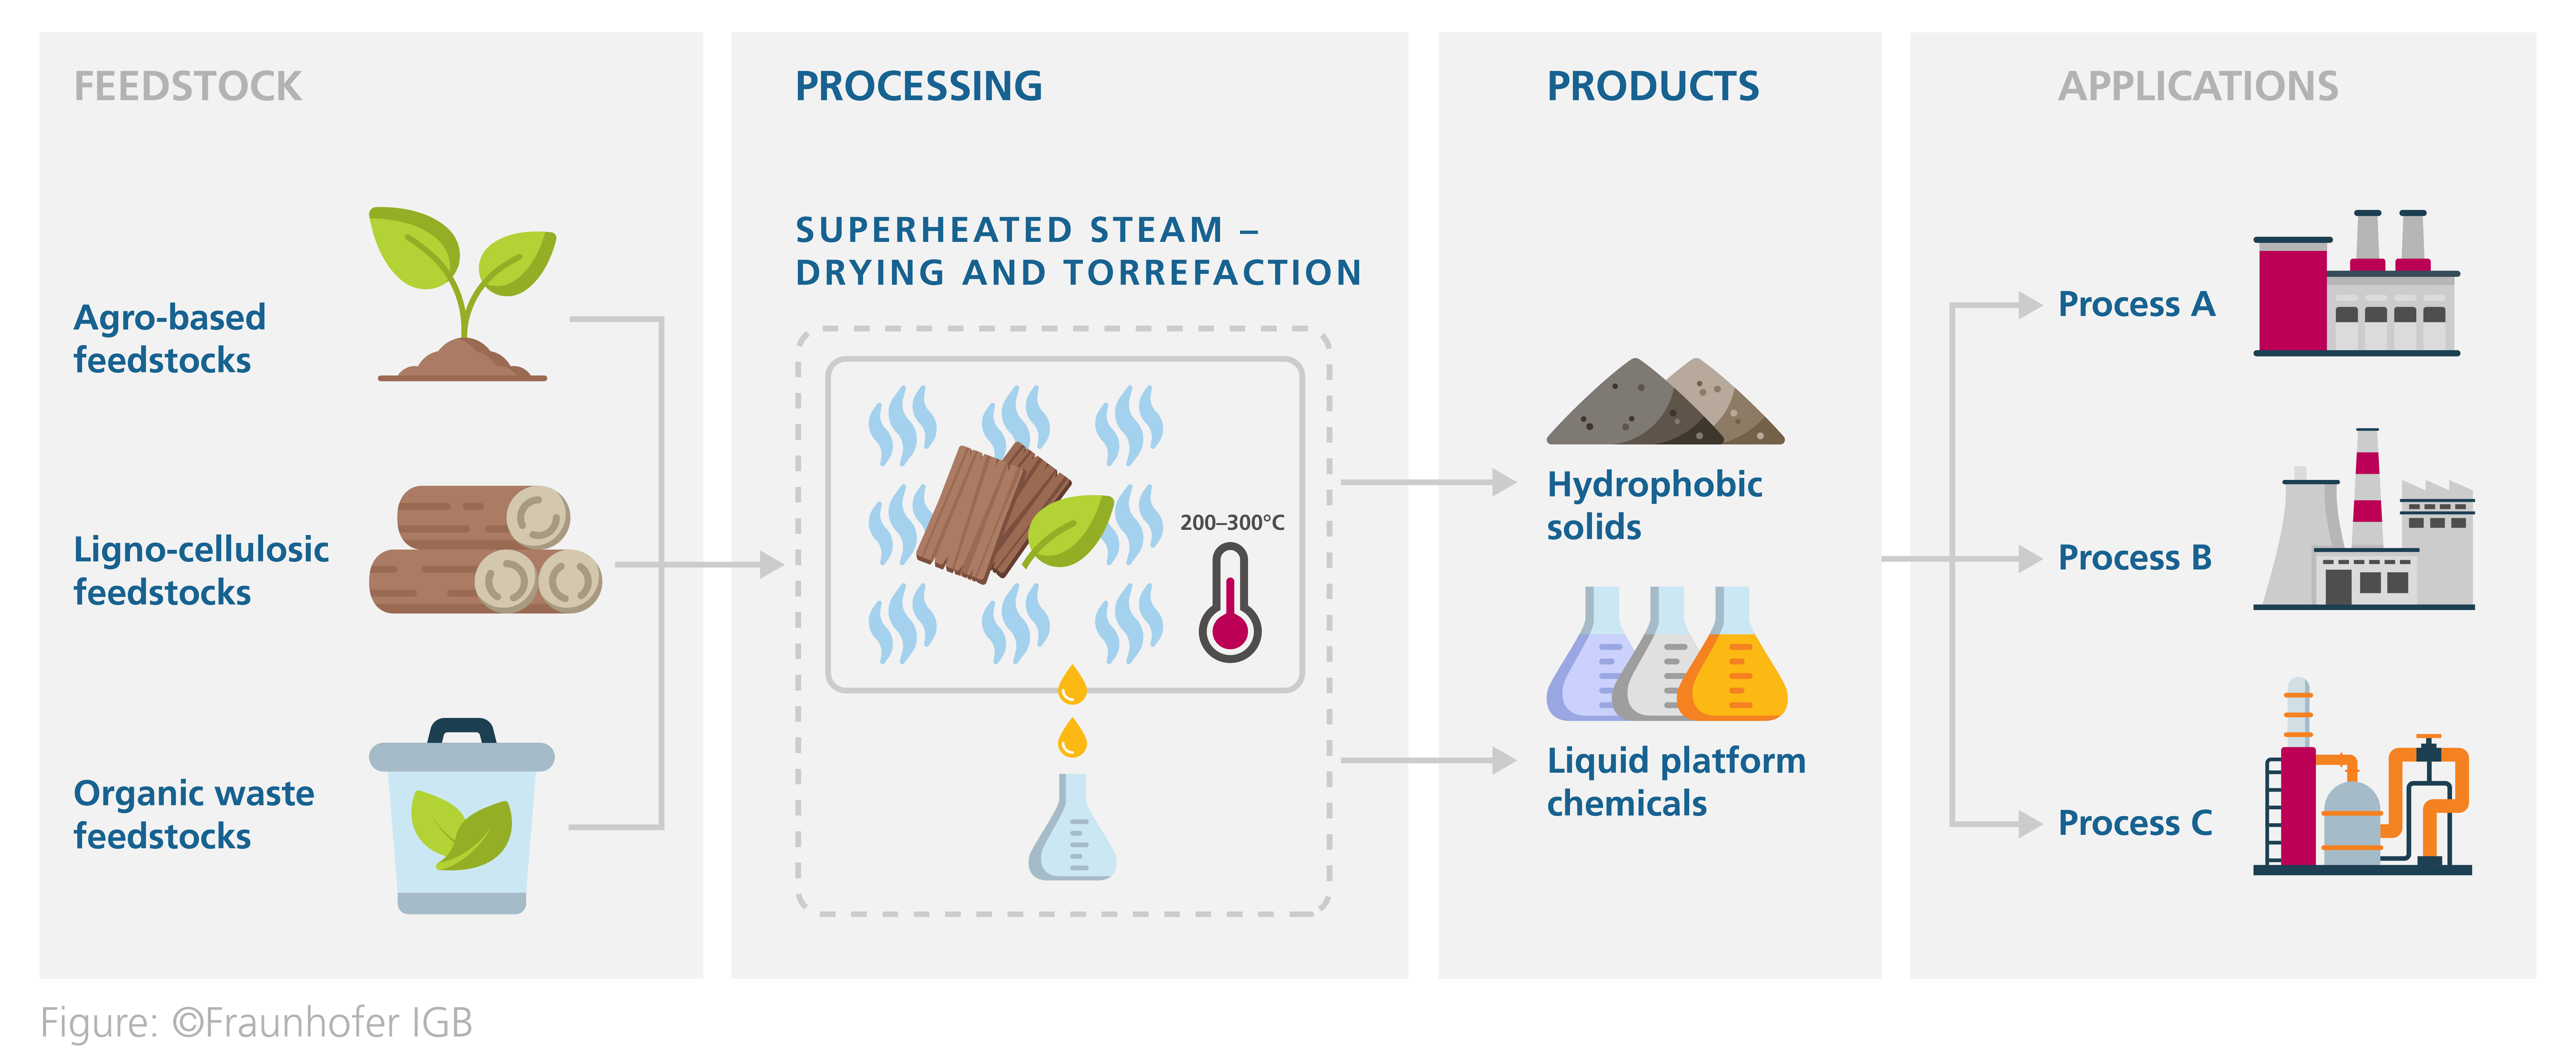 infographic that shows the processing of biobased residues via superheated steam